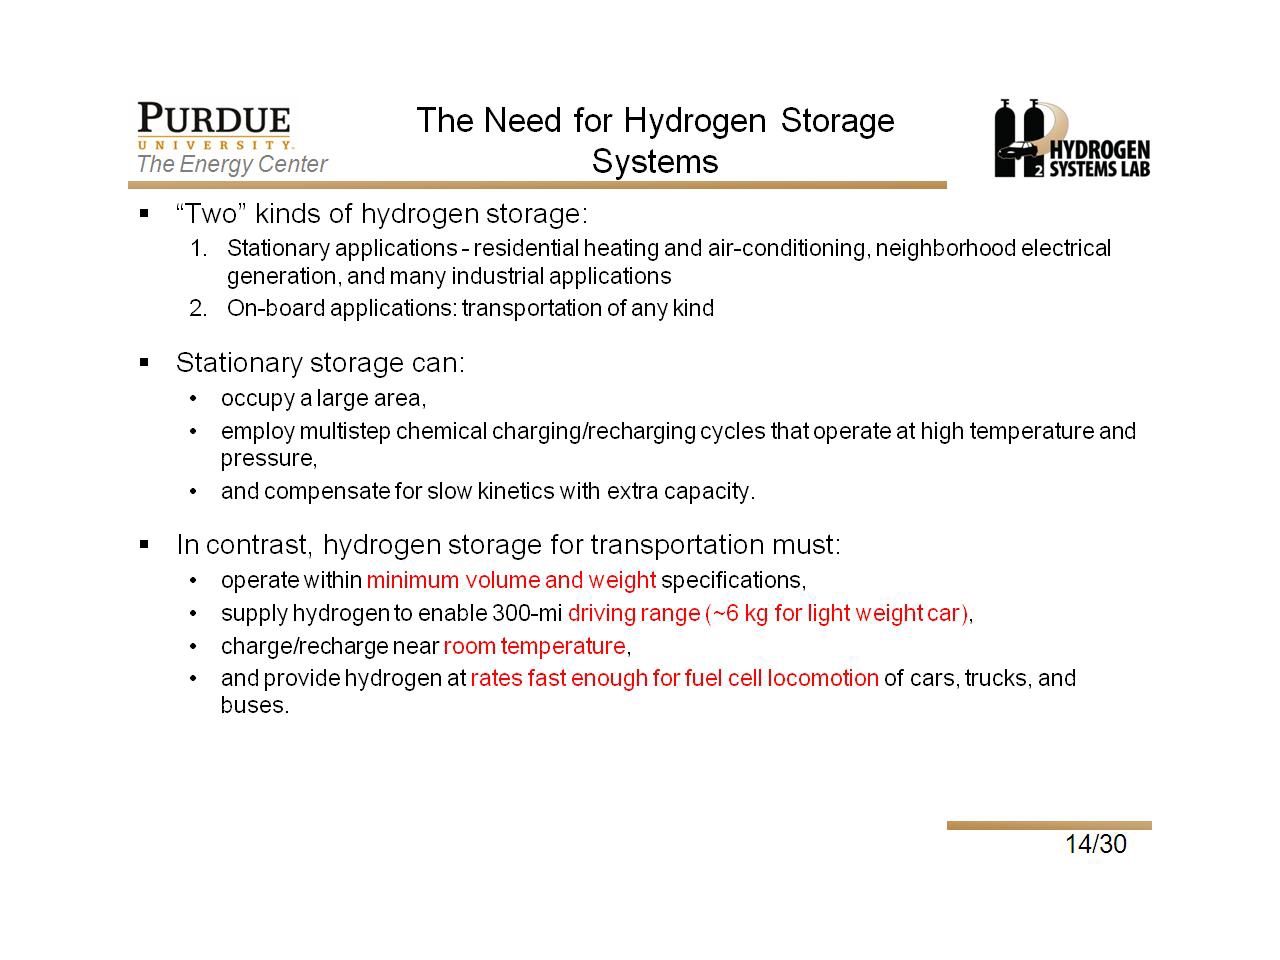 The Need for Hydrogen Storage Systems